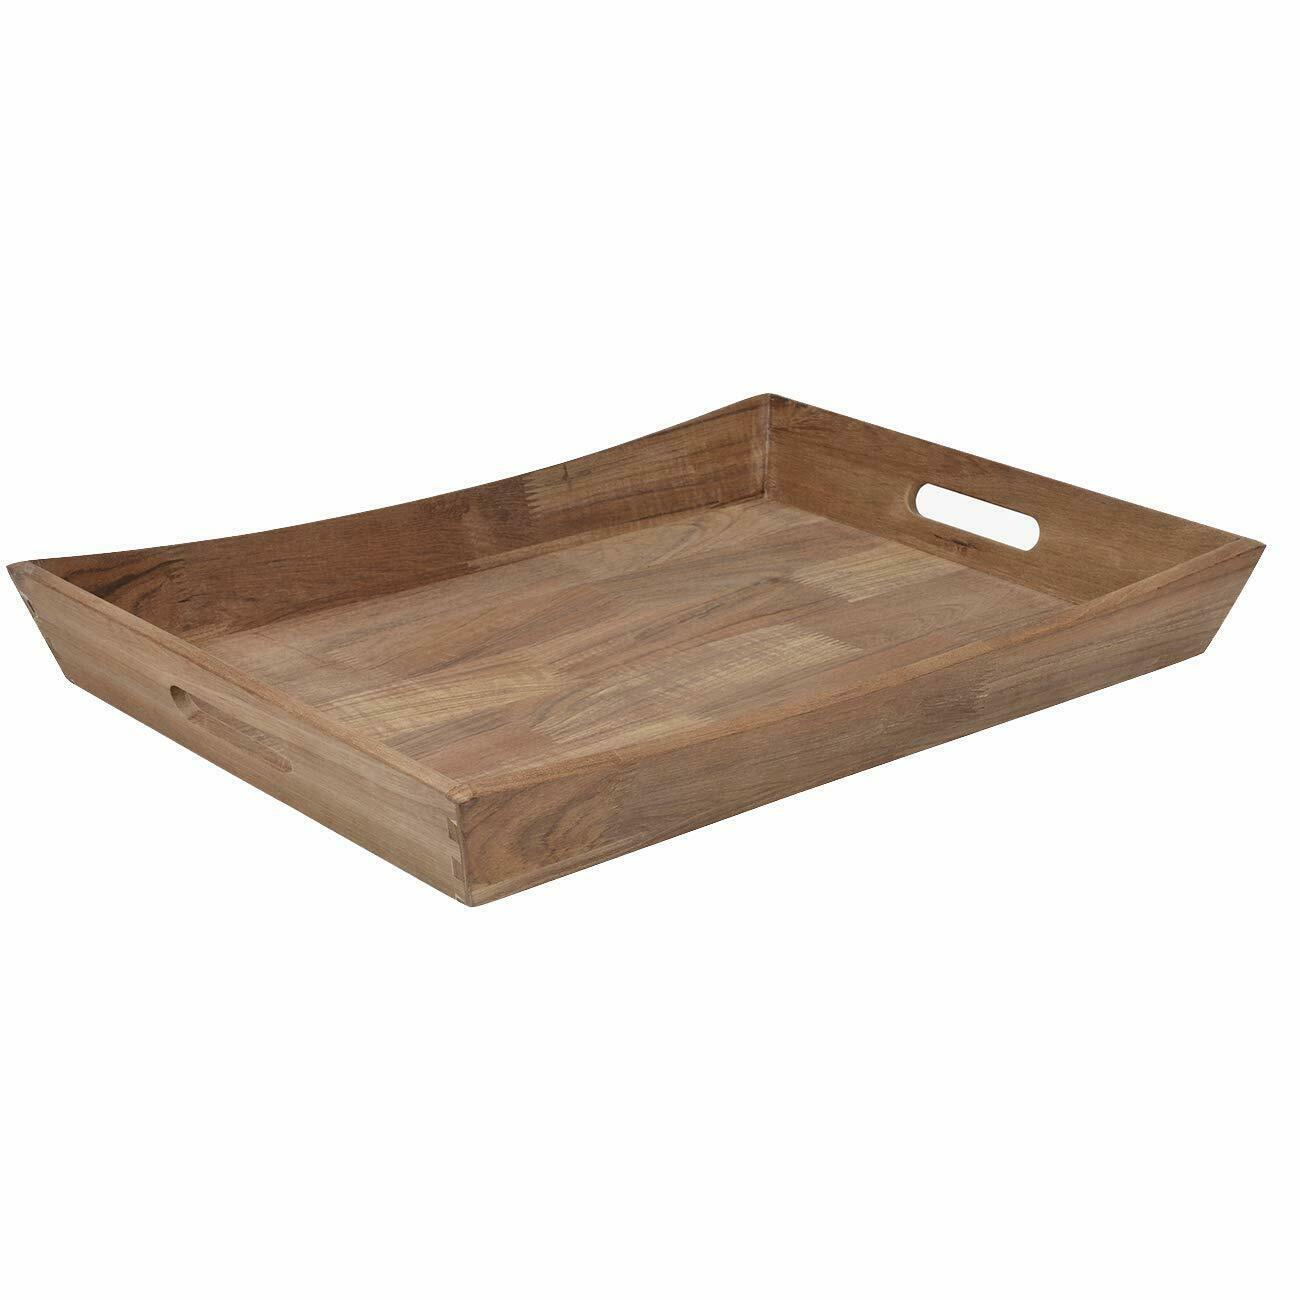 22”x16” Extra Large Curved Wooden Tray Ottoman Tray With Handle FSC ...